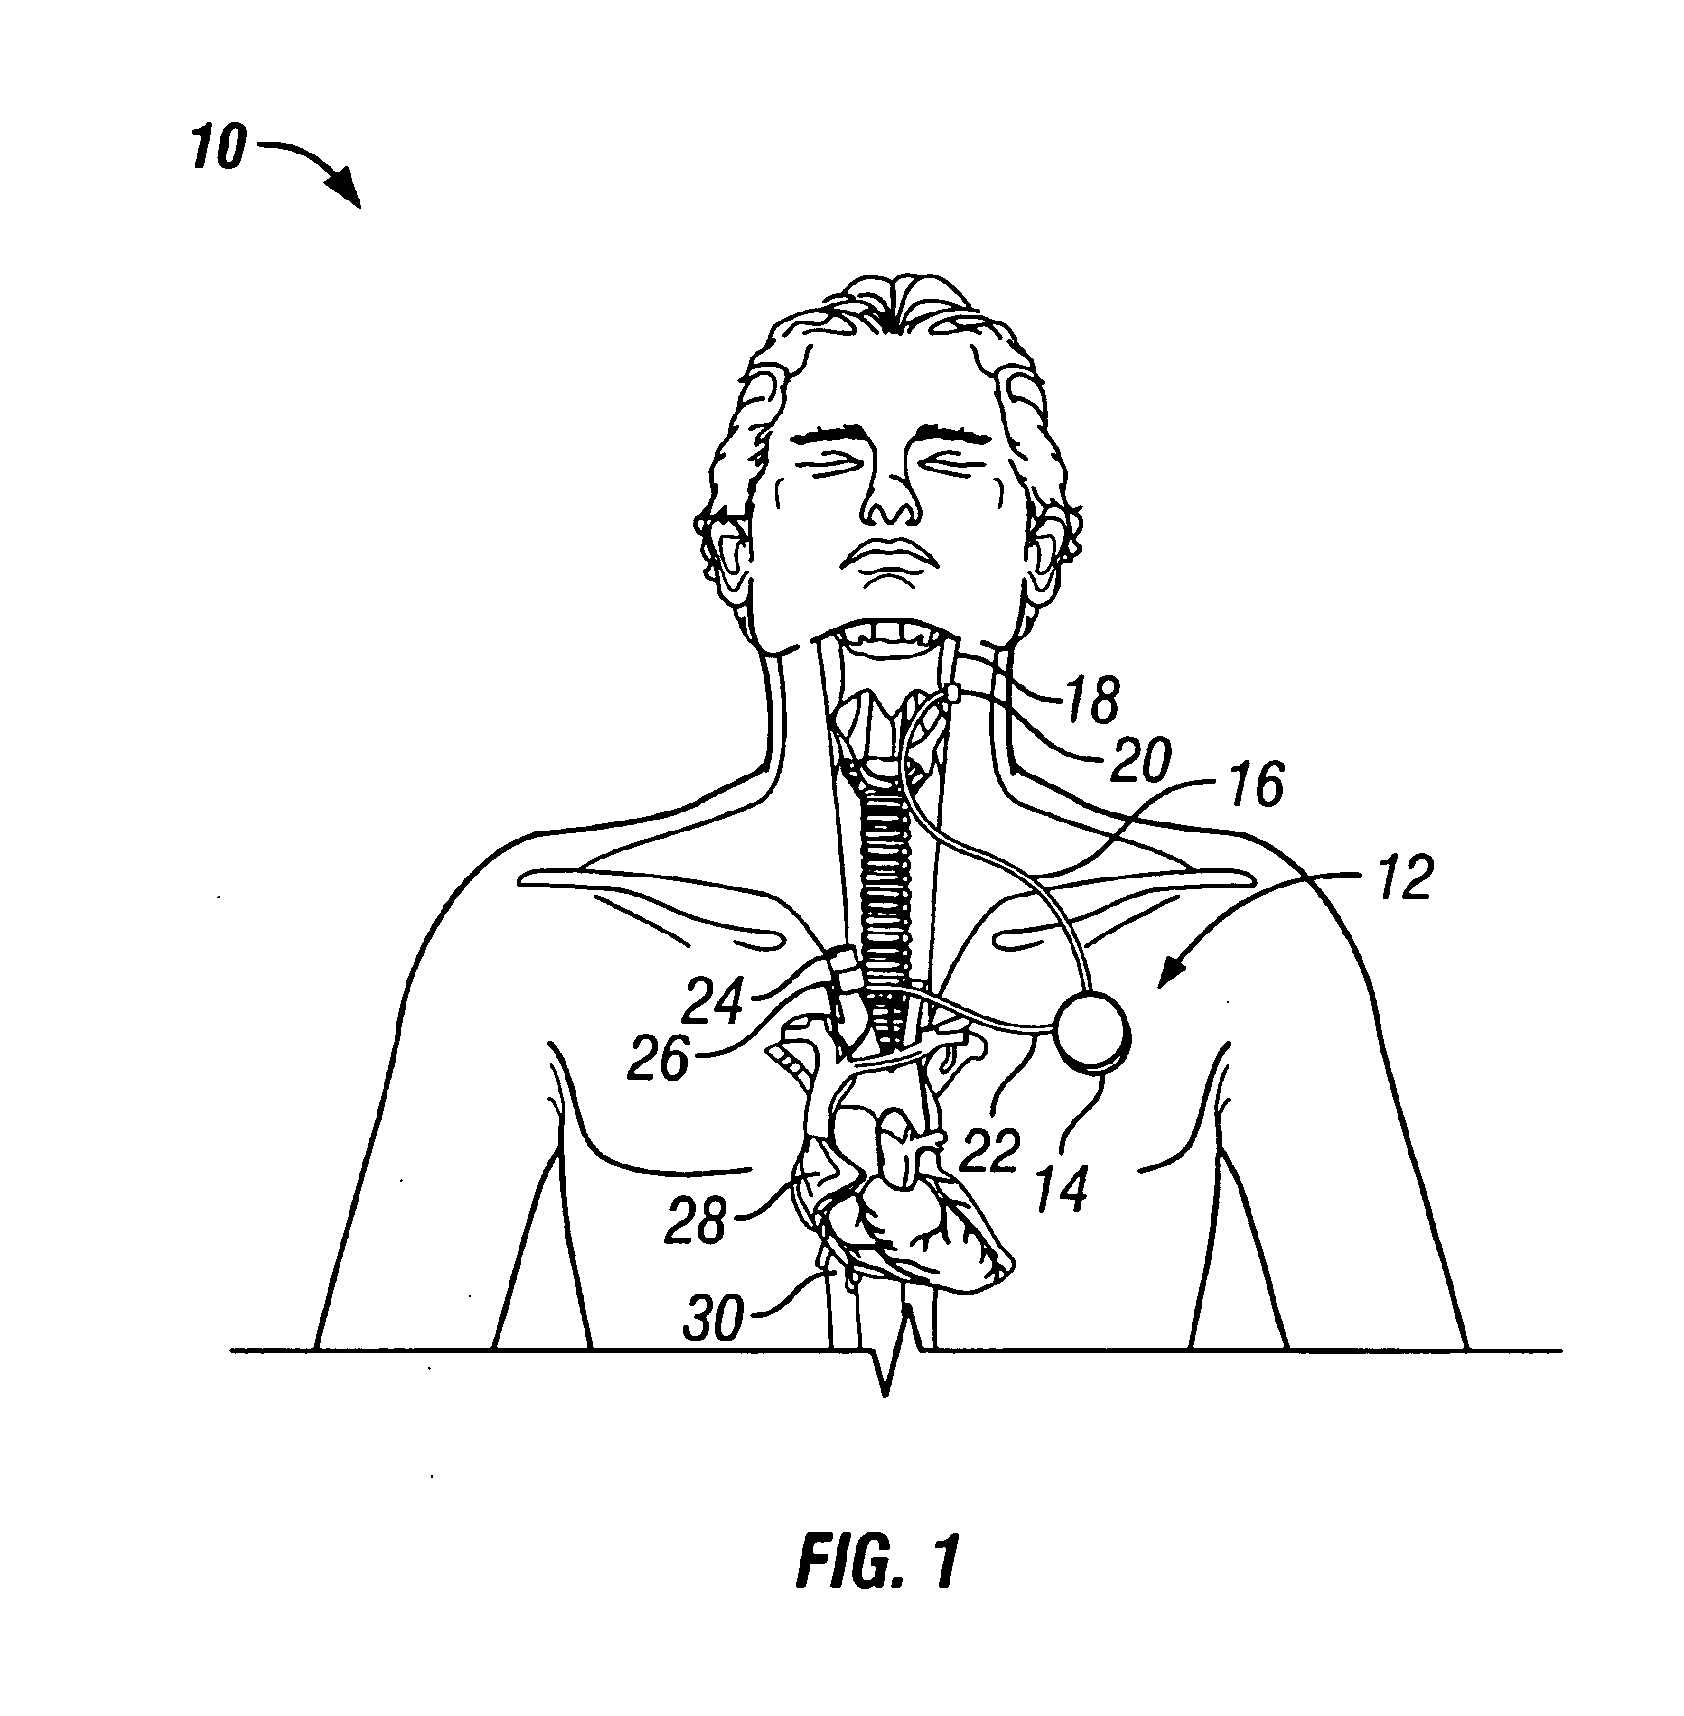 Apparatus and methods for cooling a region within the body